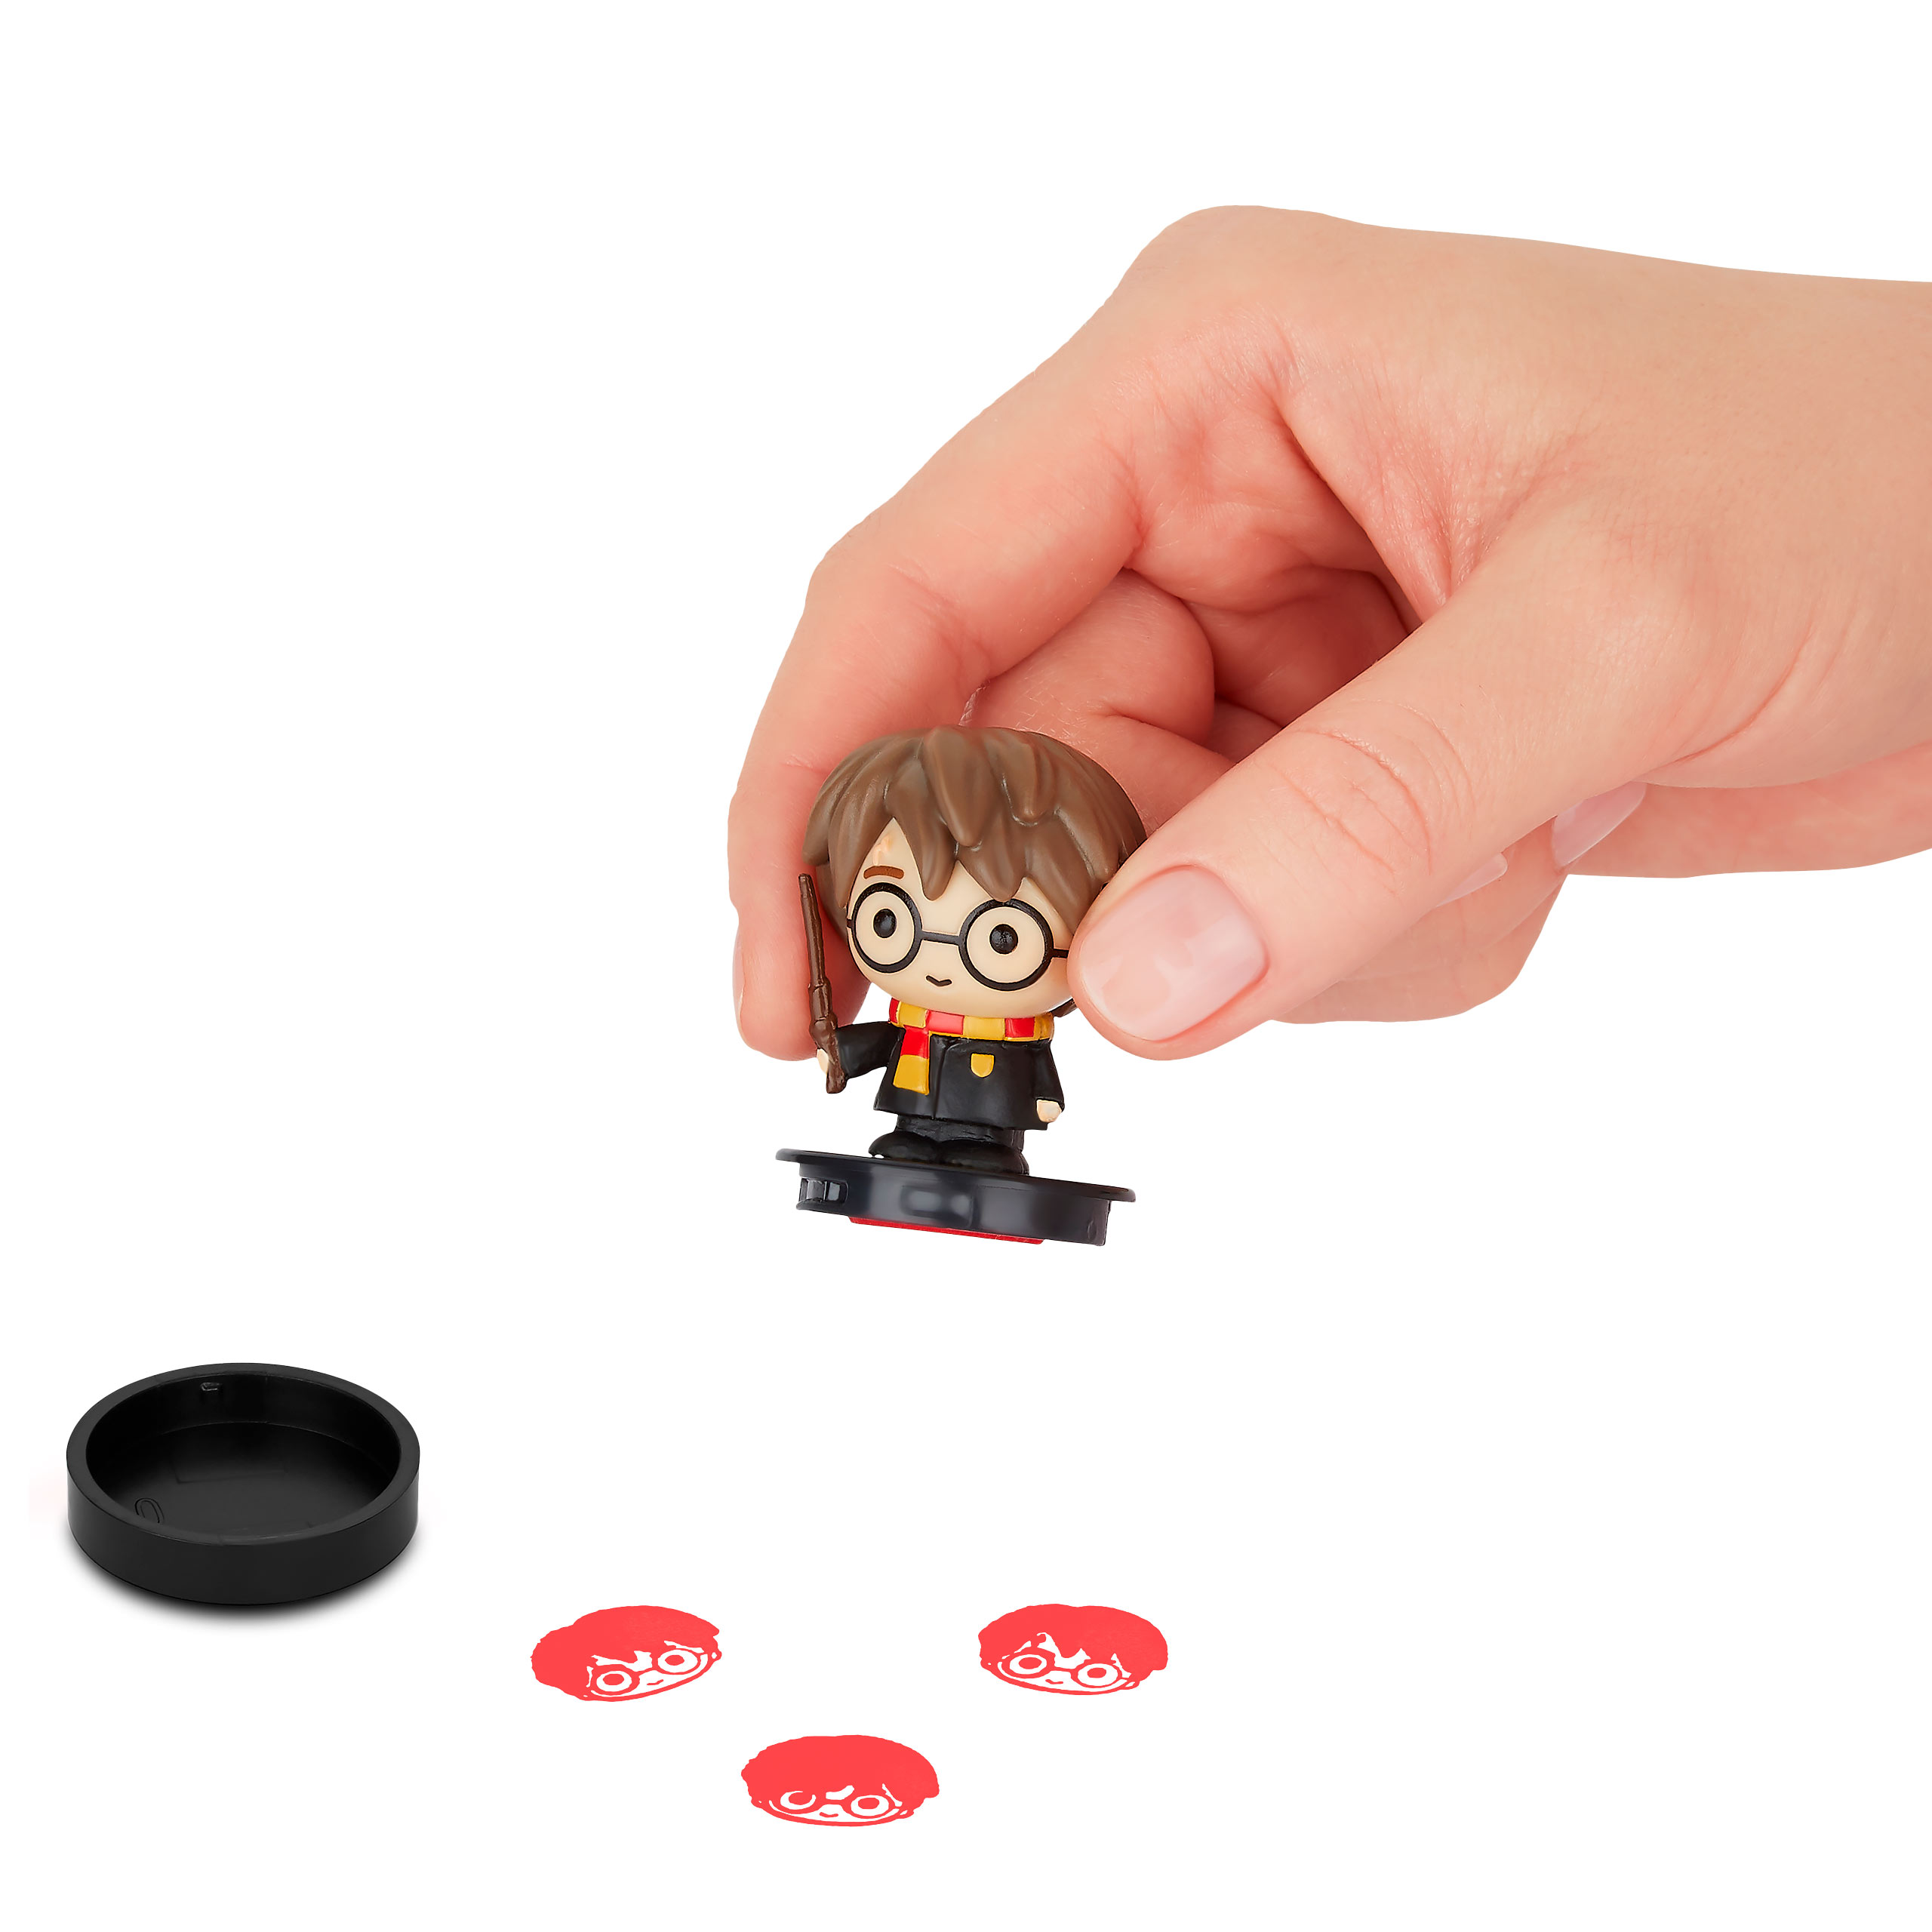 Harry Potter - Figurine Mystery Minis avec tampon